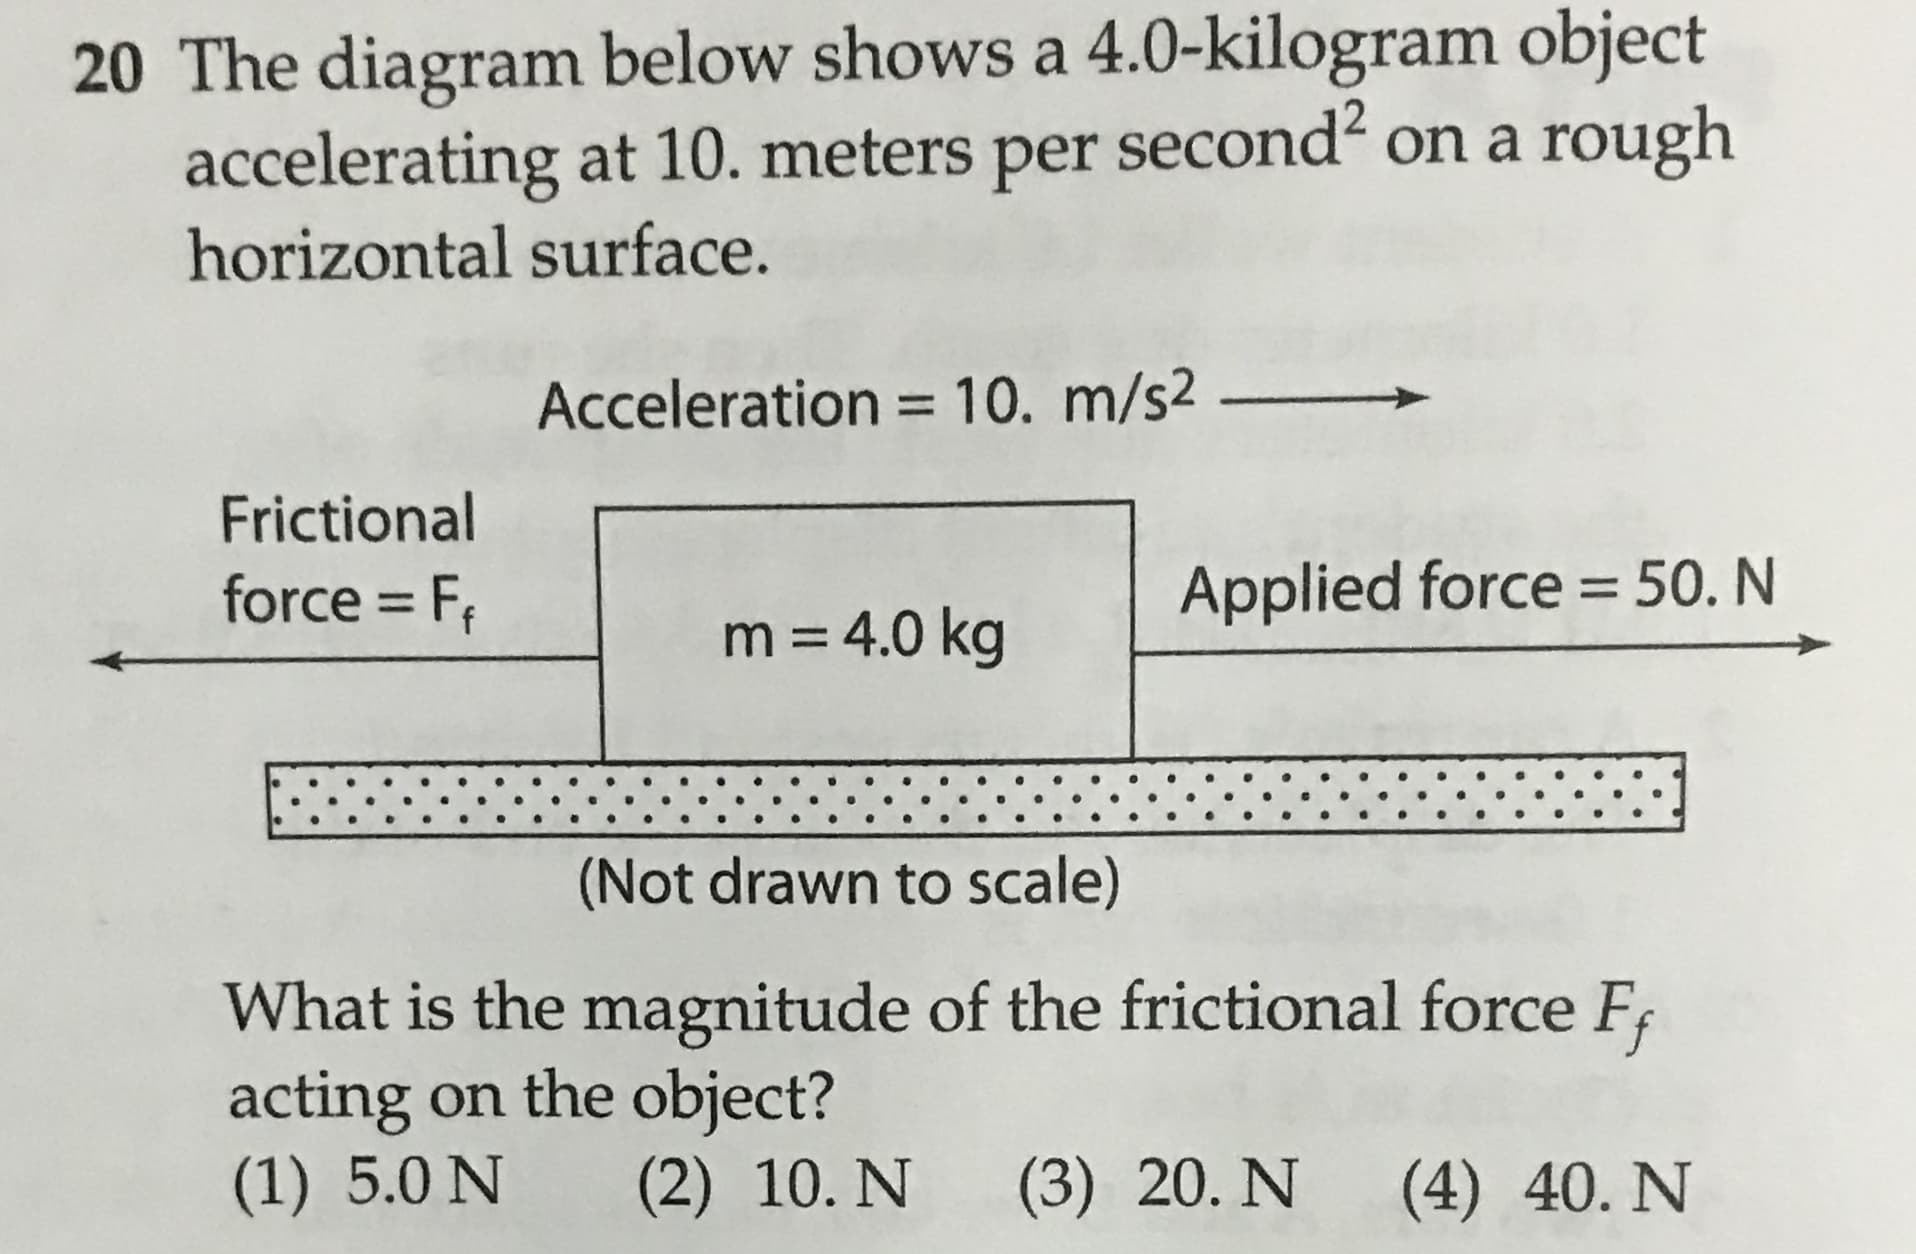 20 The diagram below shows a 4.0-kilogram object
accelerating at 10. meters per second on a rough
horizontal surface.
Acceleration = 10. m/s2
Frictional
force F
Applied force =50. N
m = 4.0 kg
(Not drawn to scale)
What is the magnitude of the frictional force F
acting on the object?
(1) 5.0 N
(2) 10. N
(3) 20. N
(4) 40. N
